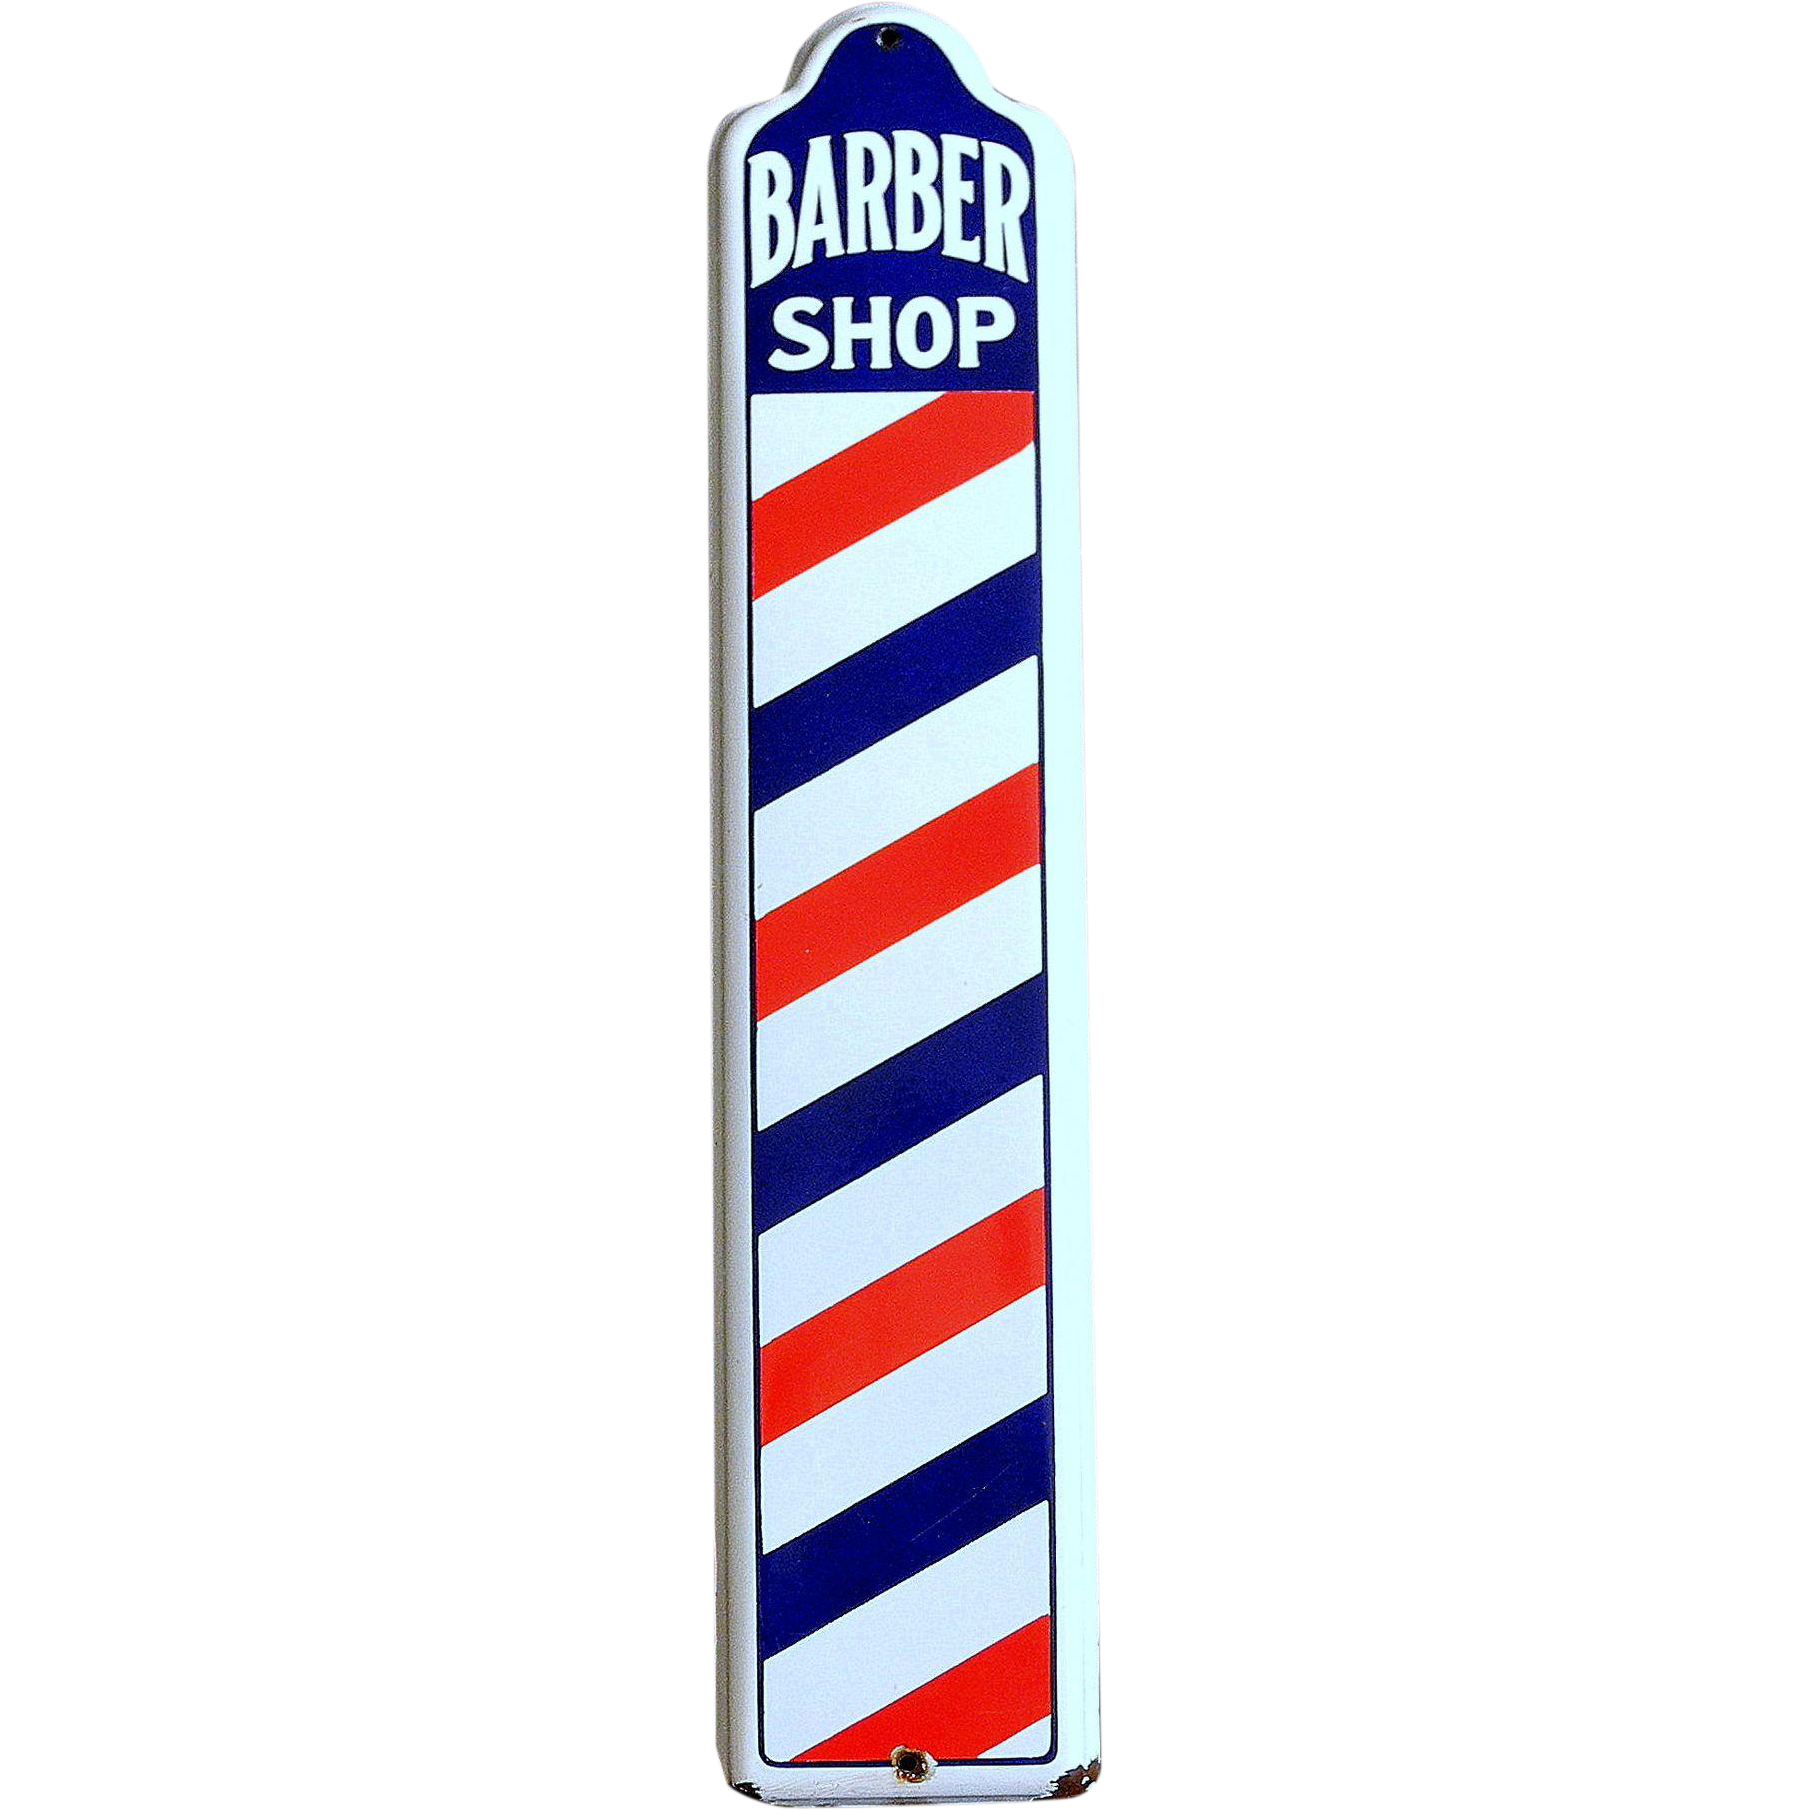 Original Vintage Barber Shop Sign, circa 1940 from thingspast on ...